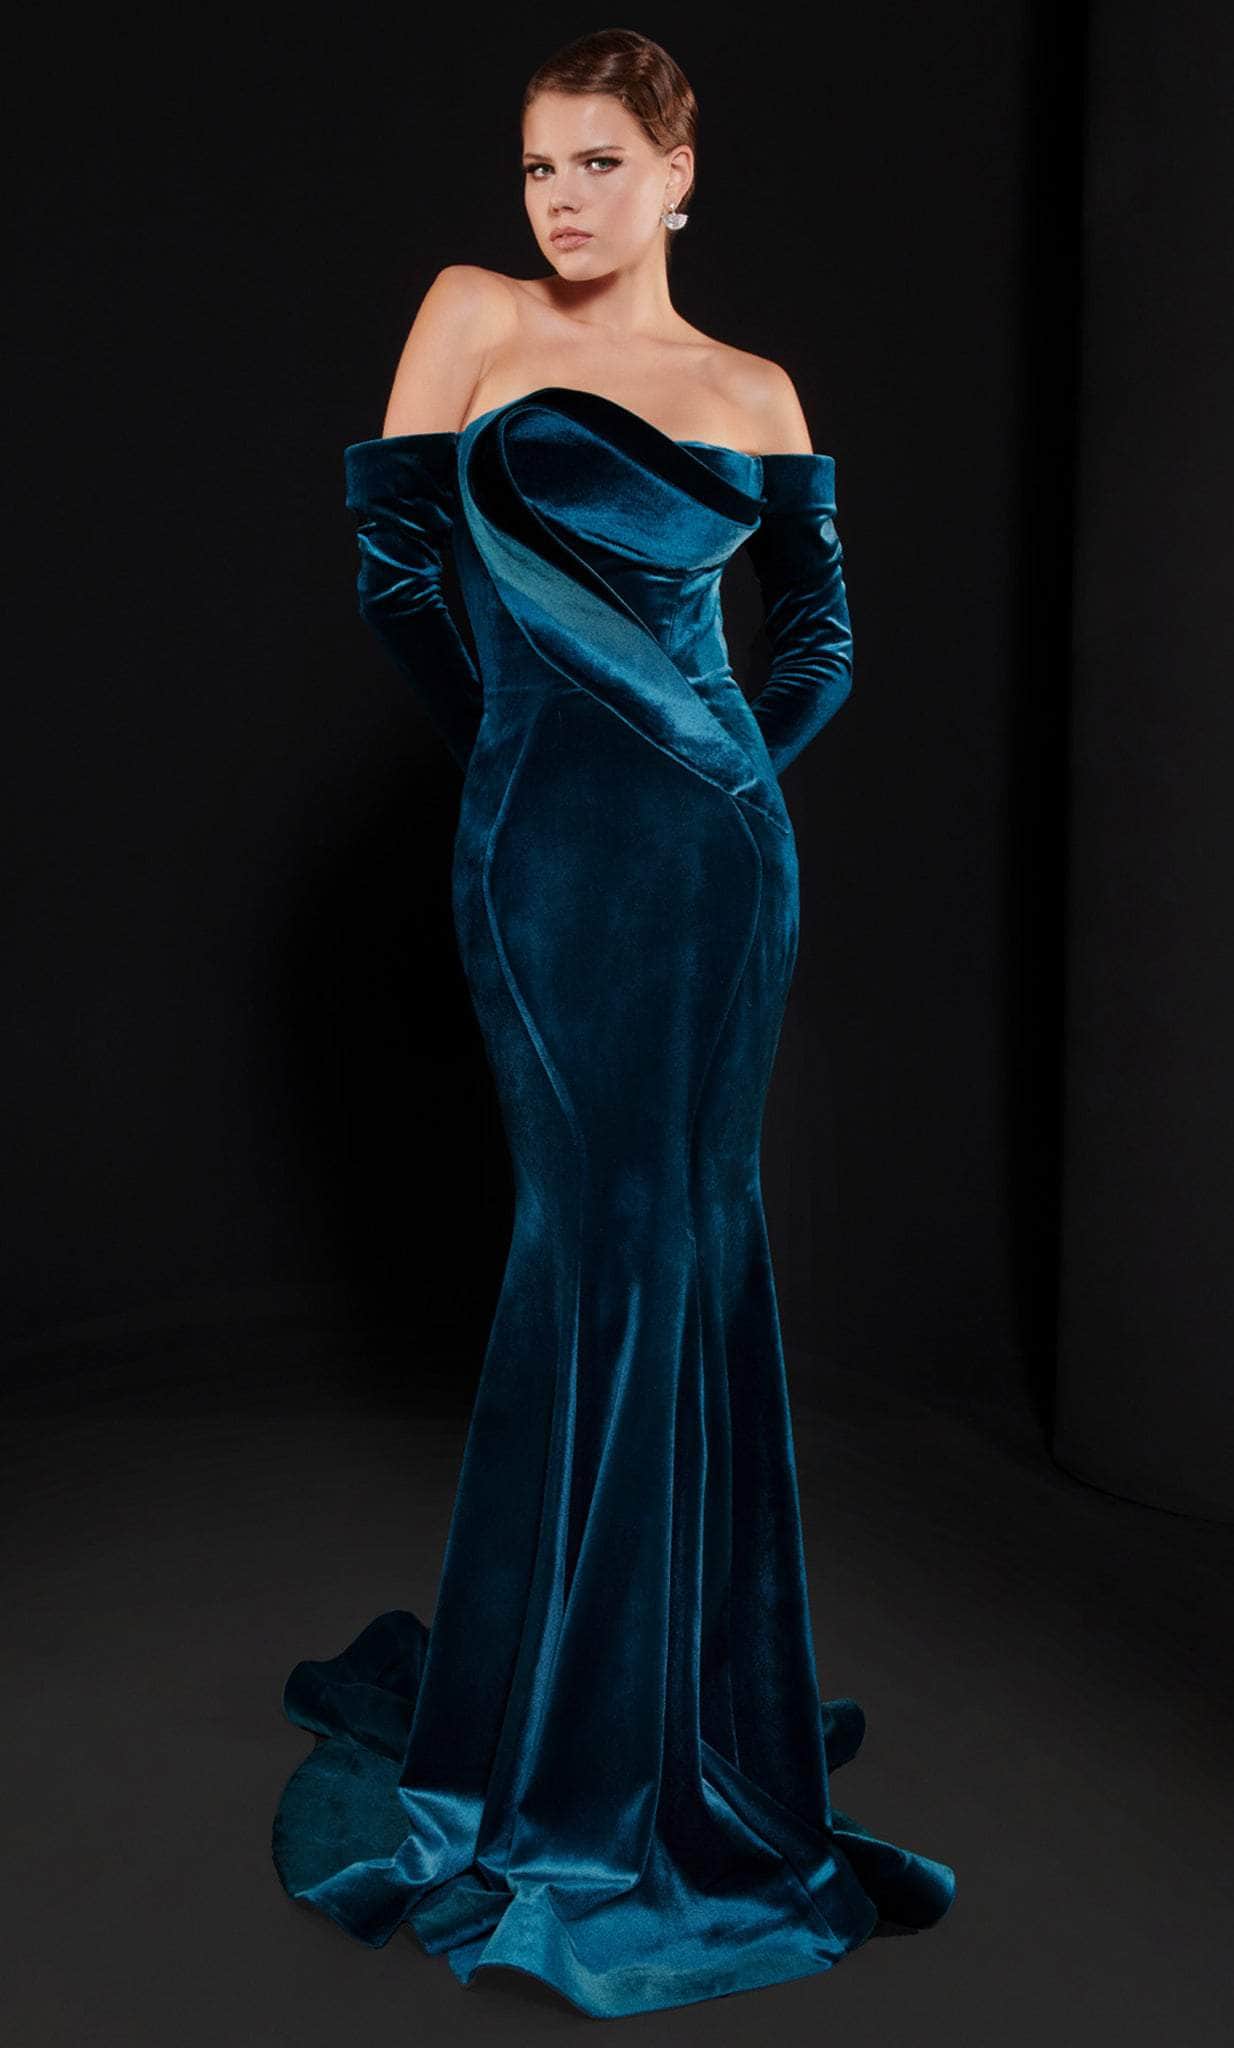 MNM COUTURE N0522 - Long Sleeve Seamed Evening Gown Special Occasion Dress